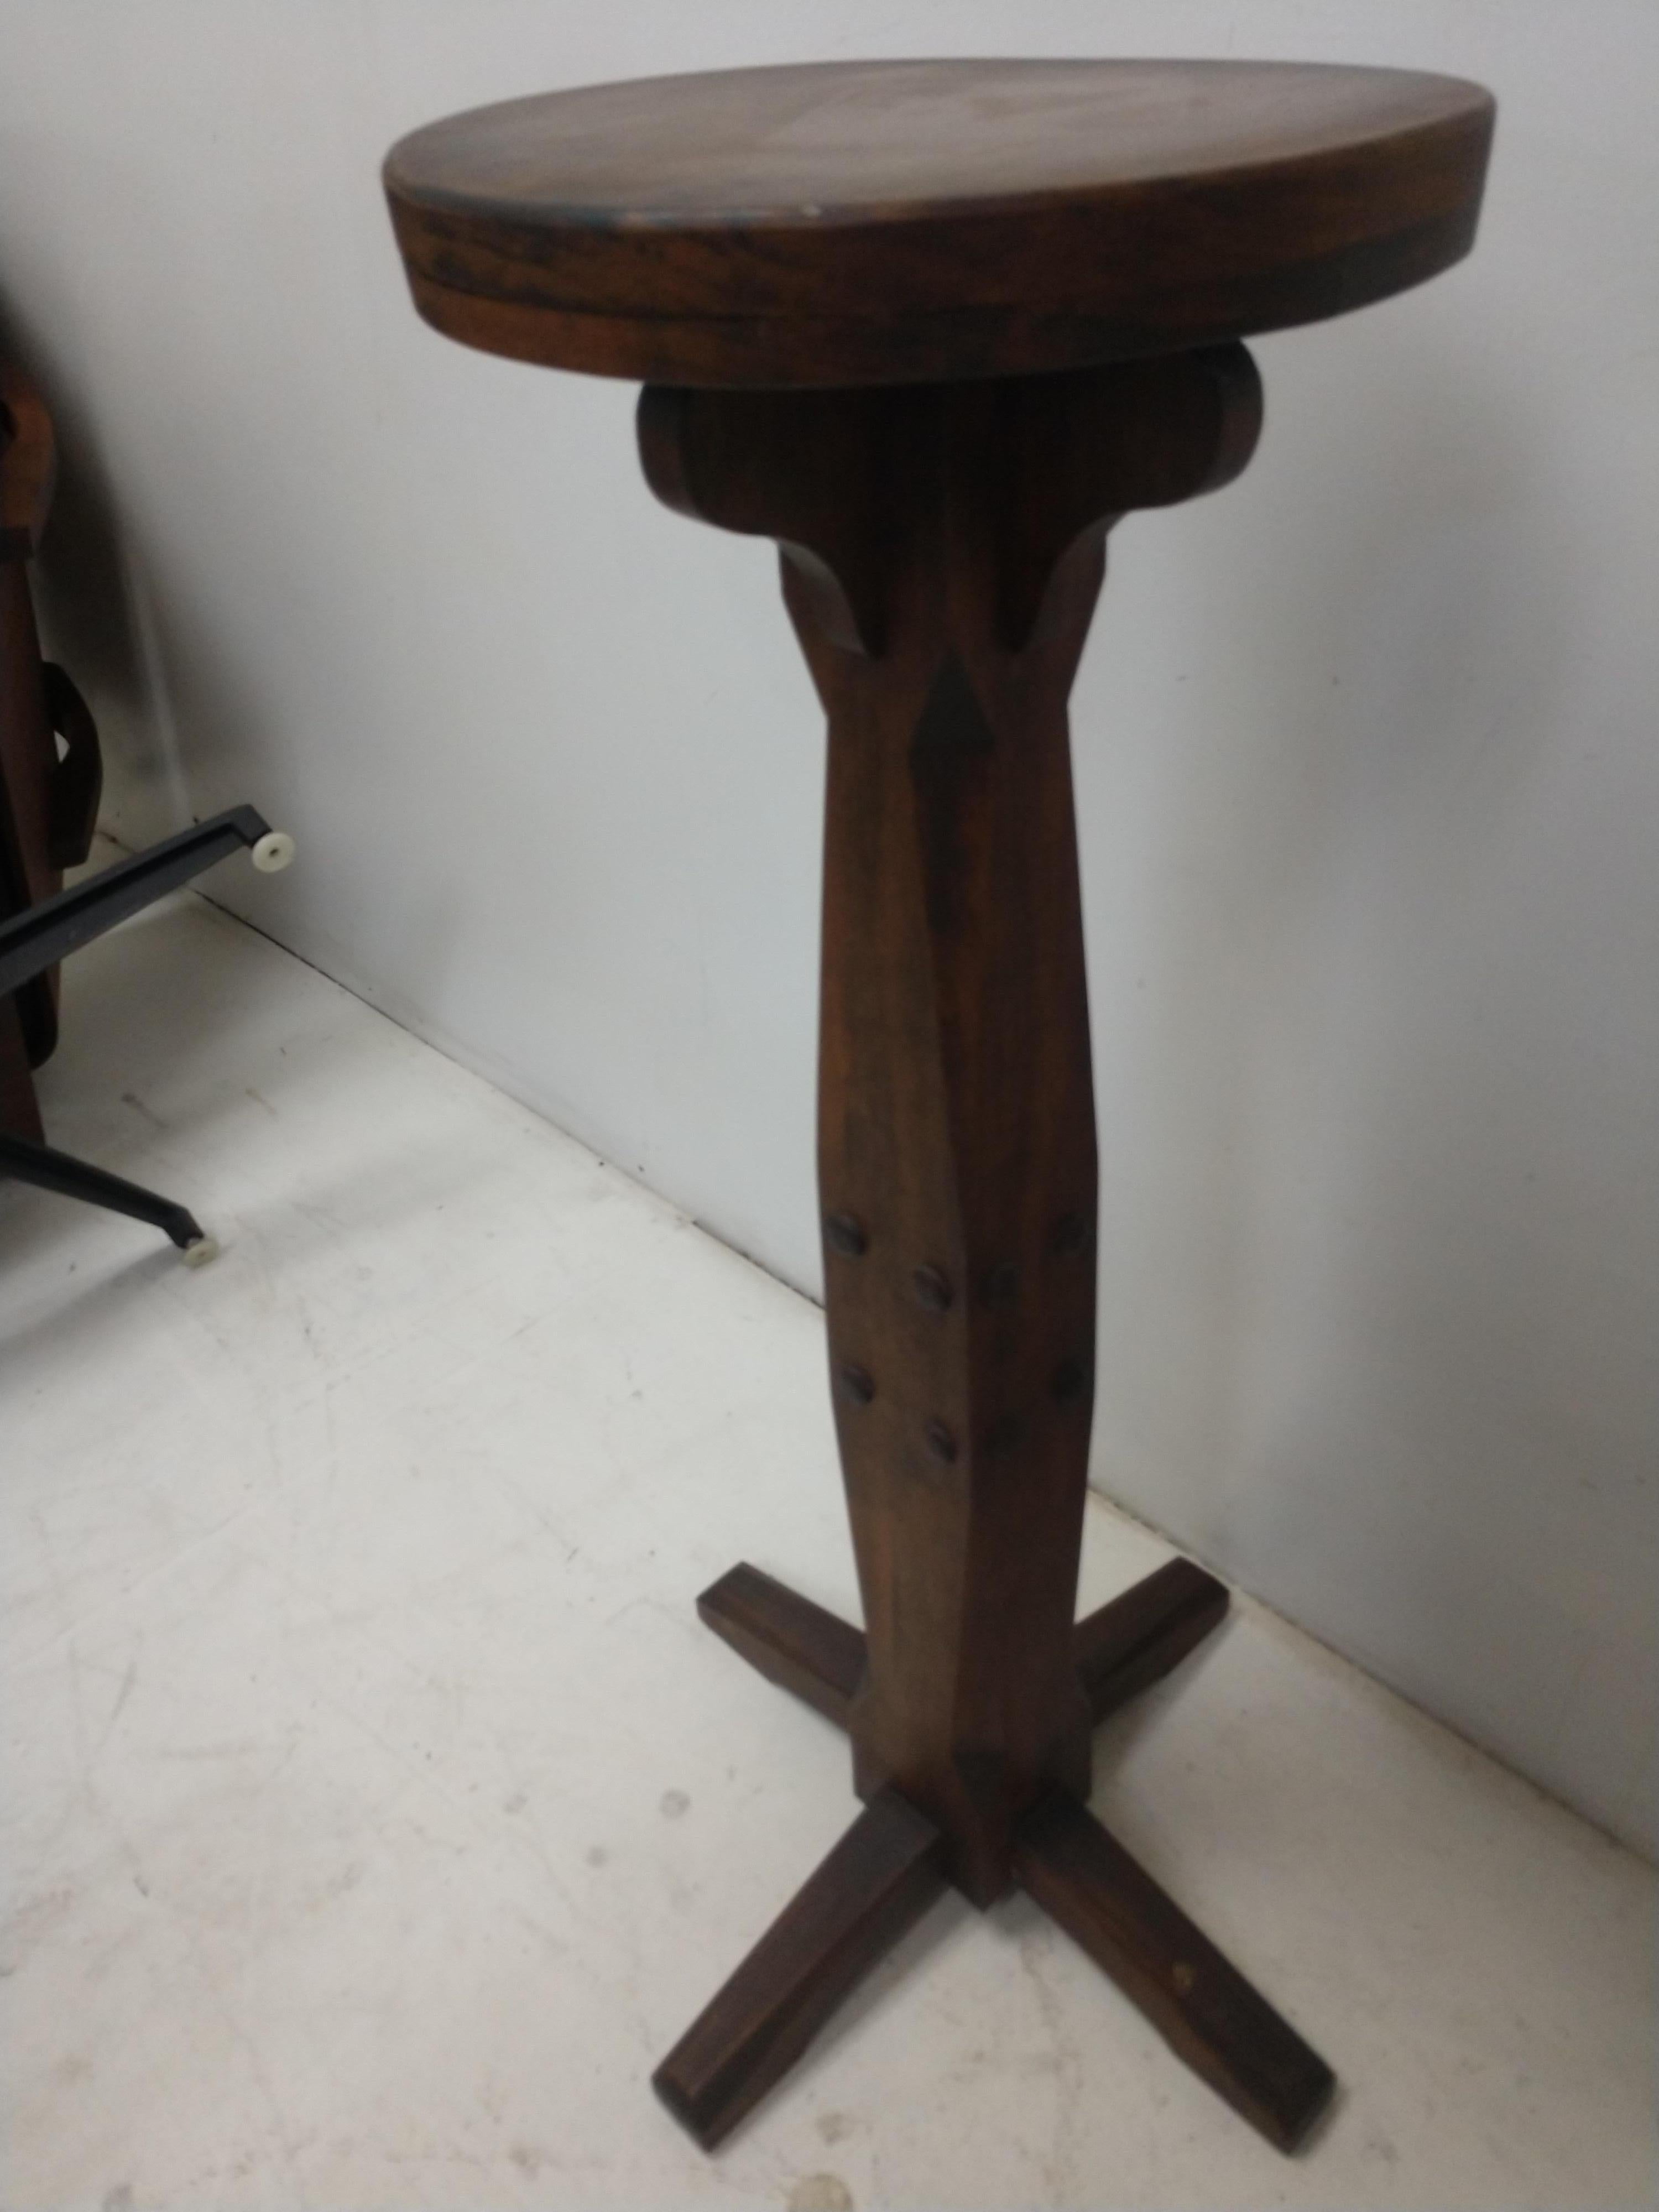 Early 20th Century Arts & Crafts Pedestal Art Display Plant Stand, circa 1910